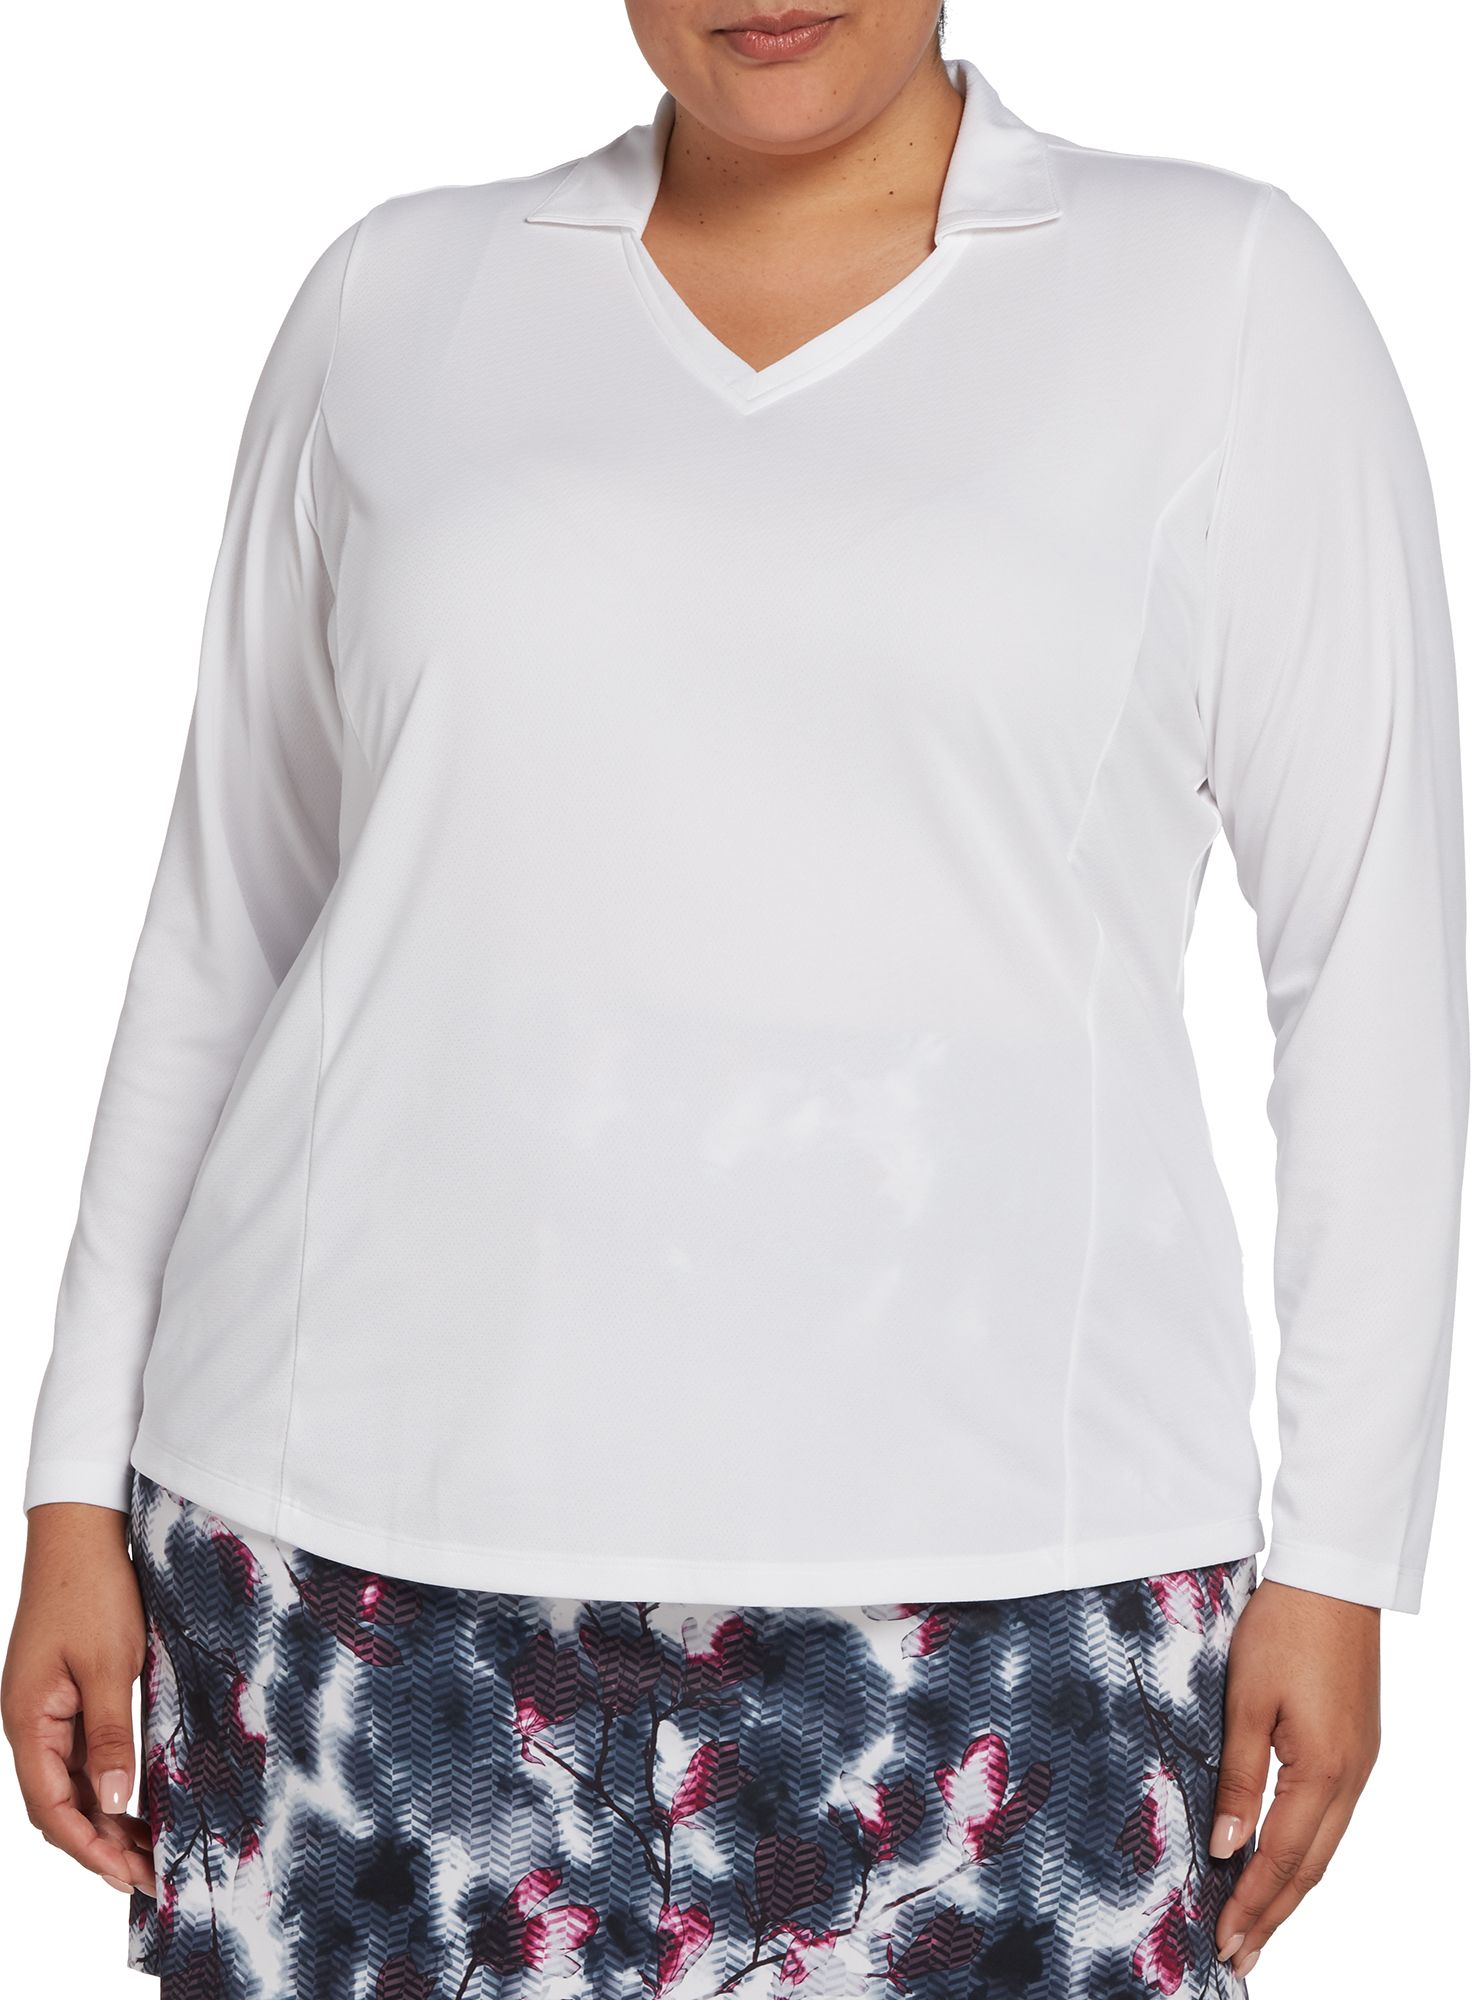 Plus-Sized Women's Golf Apparel | Best Price Guarantee at DICK'S